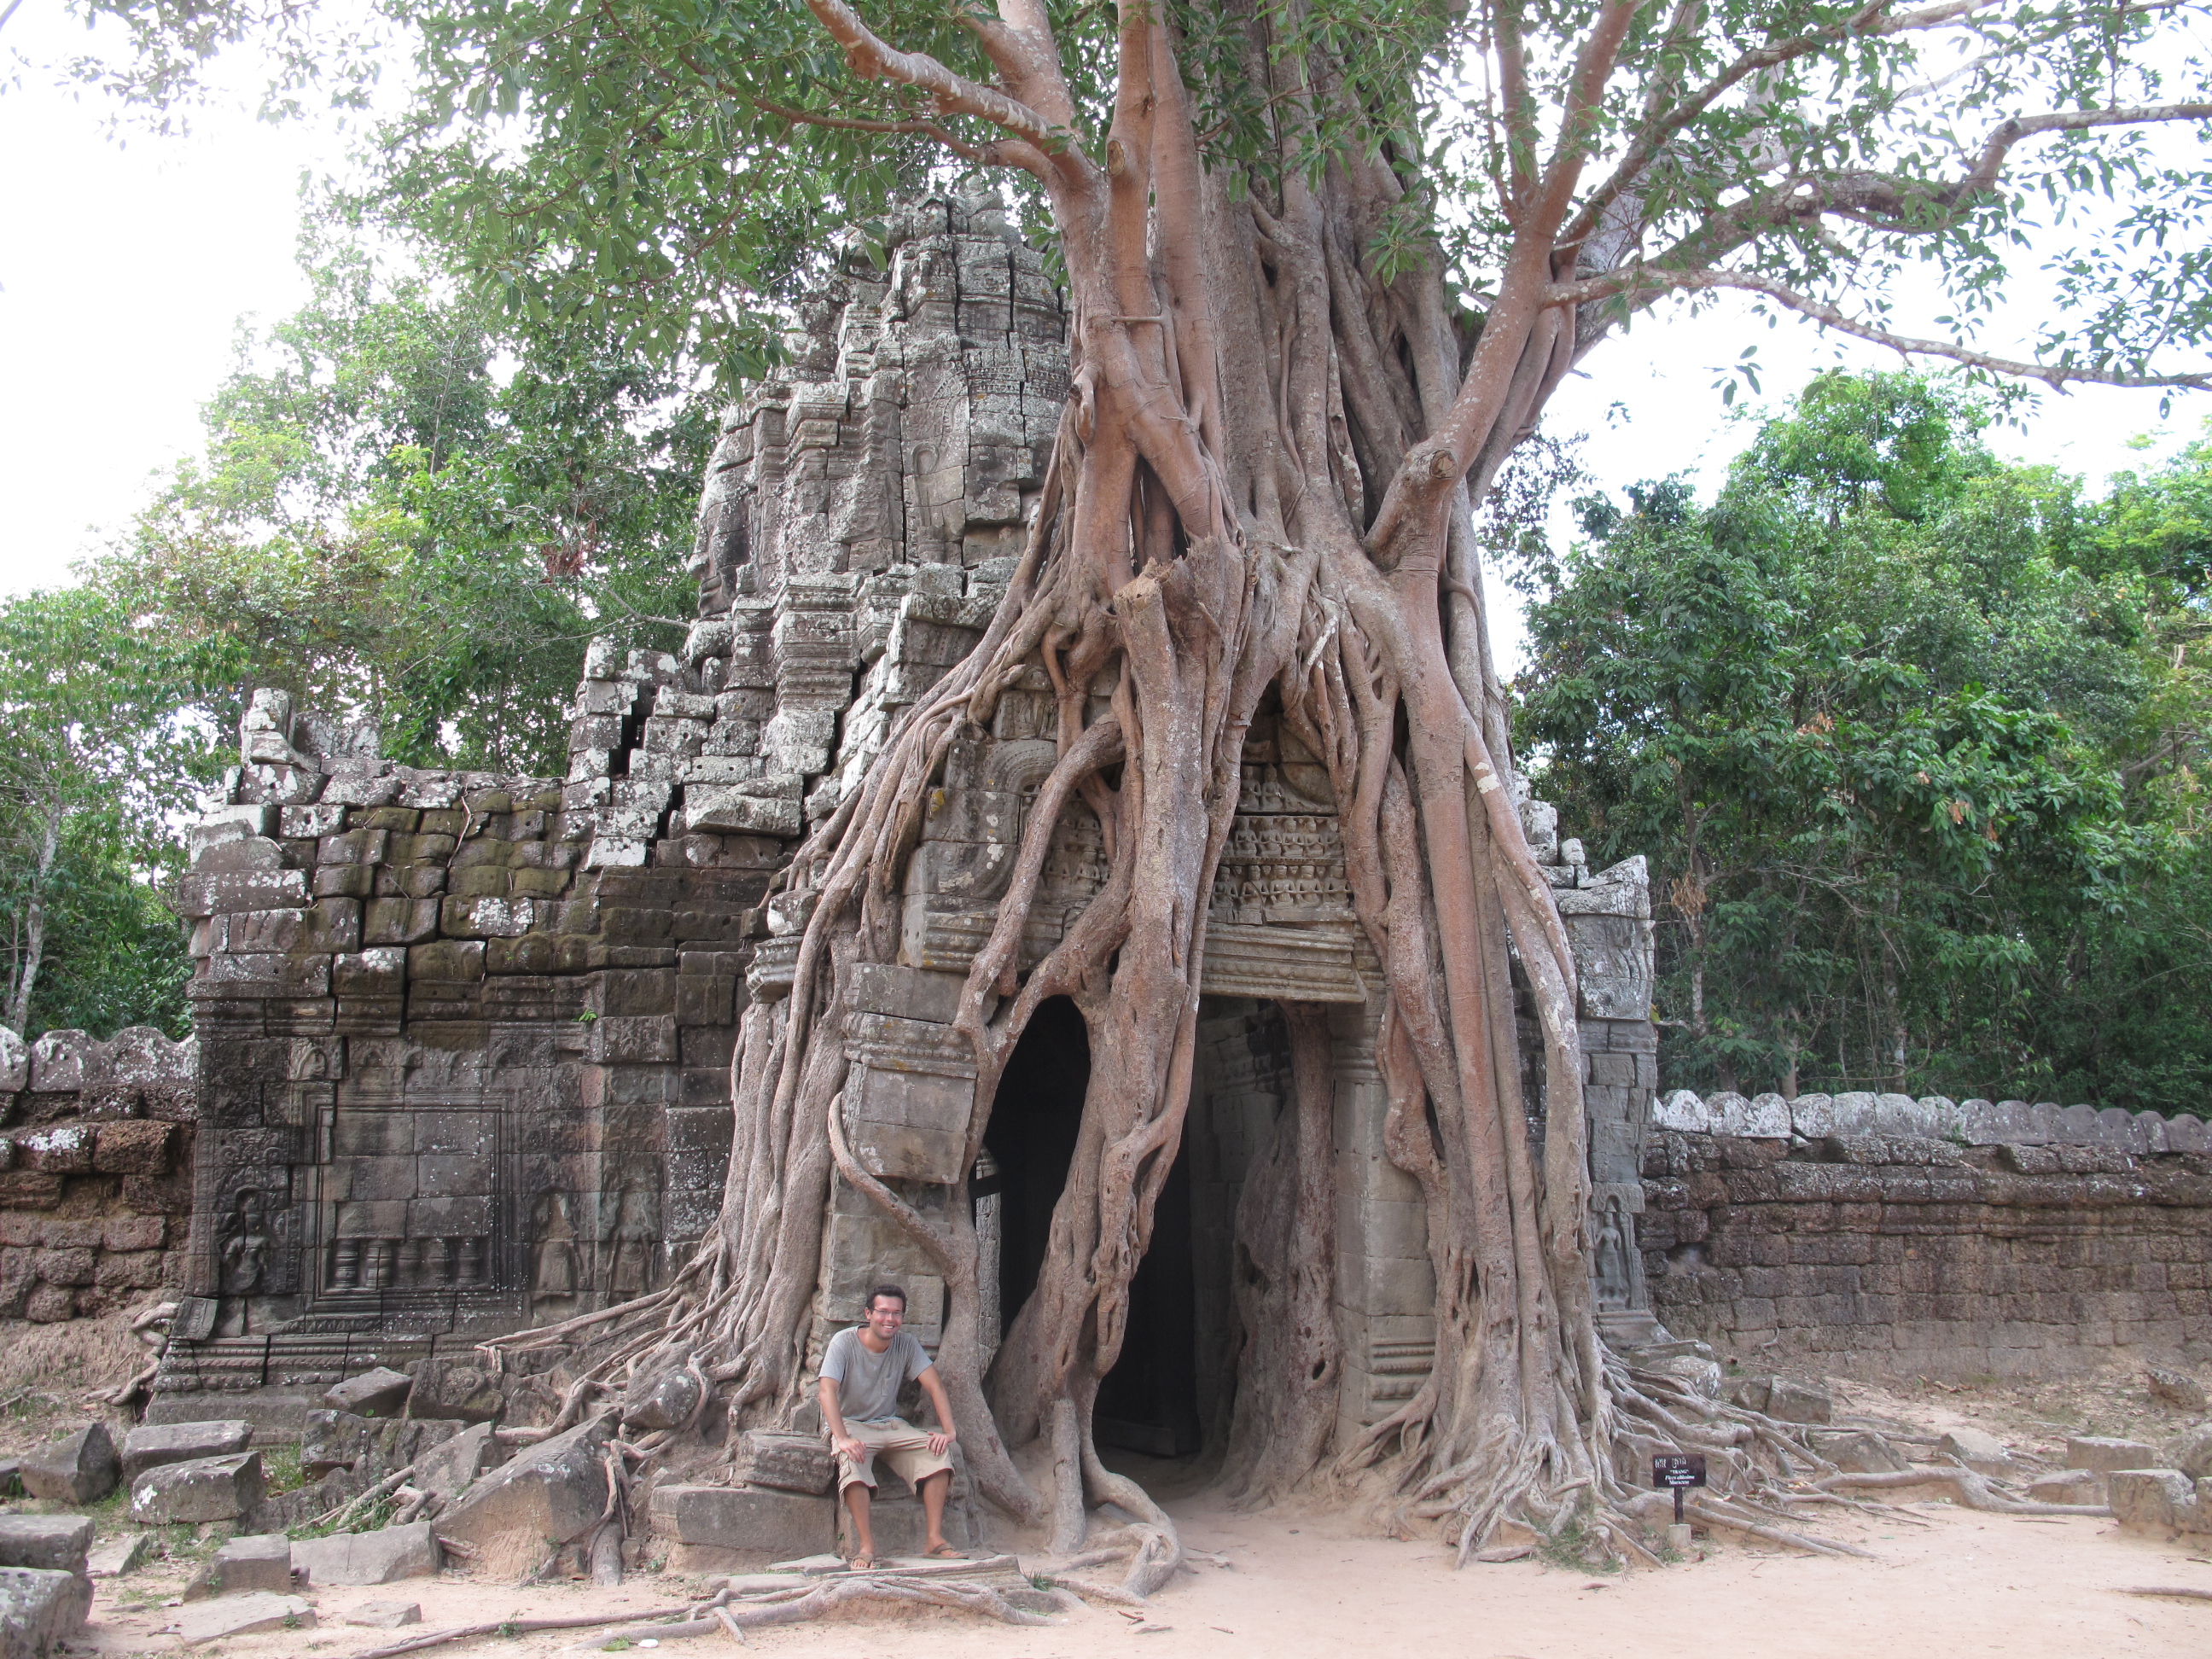 This is a picture of me in a temple complex in Cambodia.